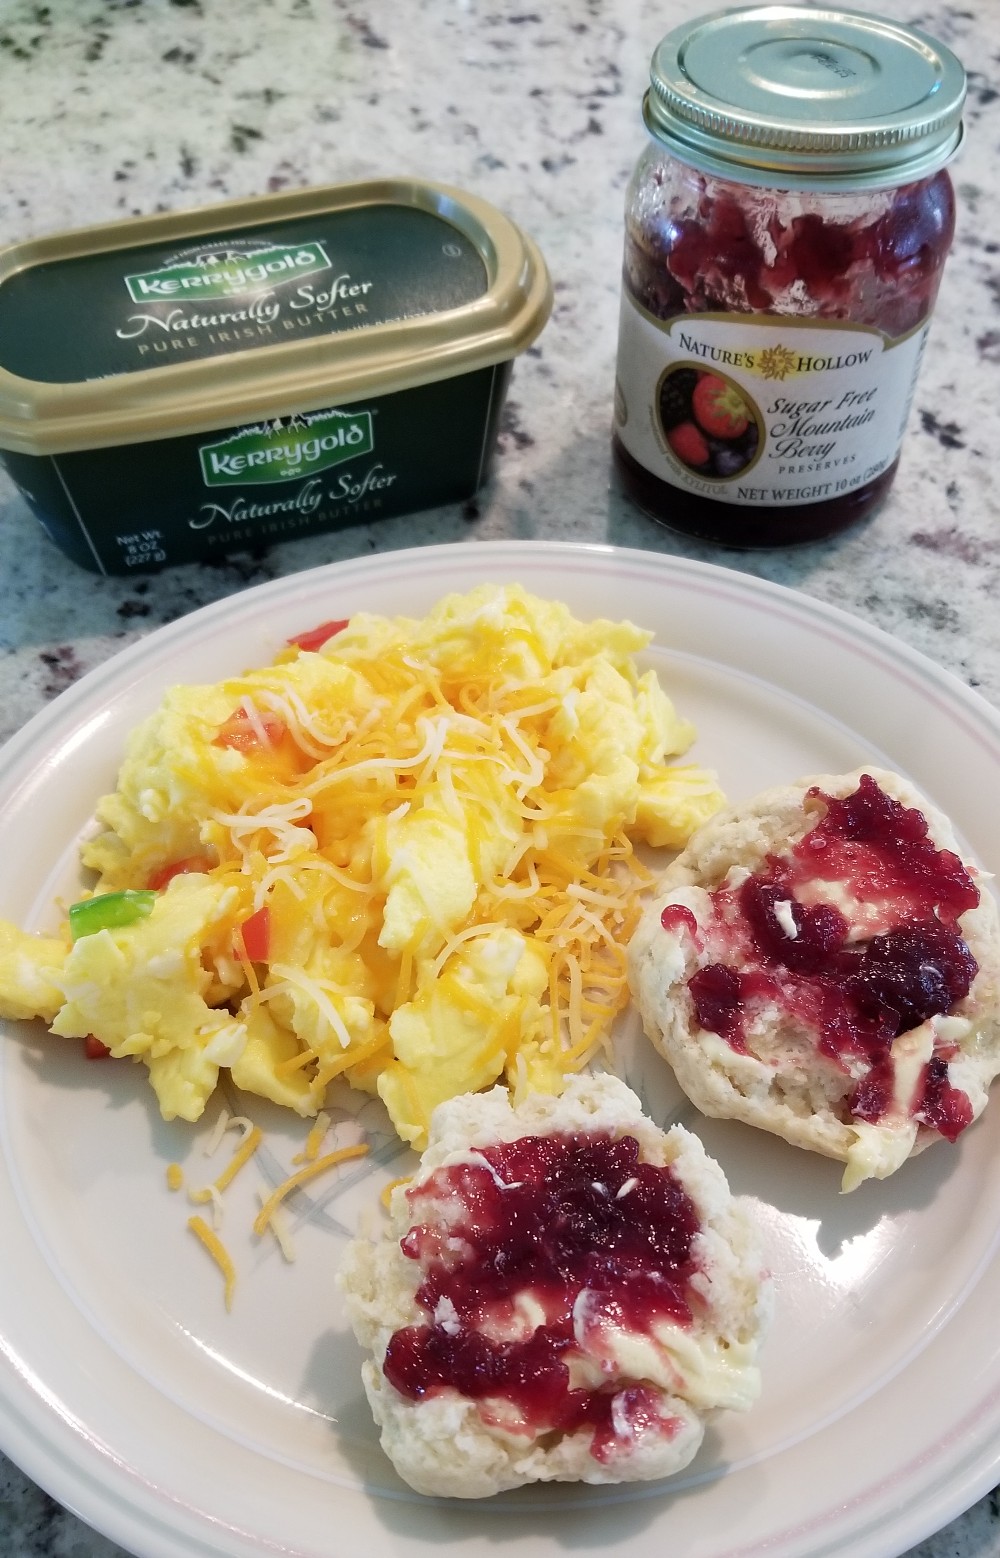 Scrambled Eggs with Carbquick Biscuits